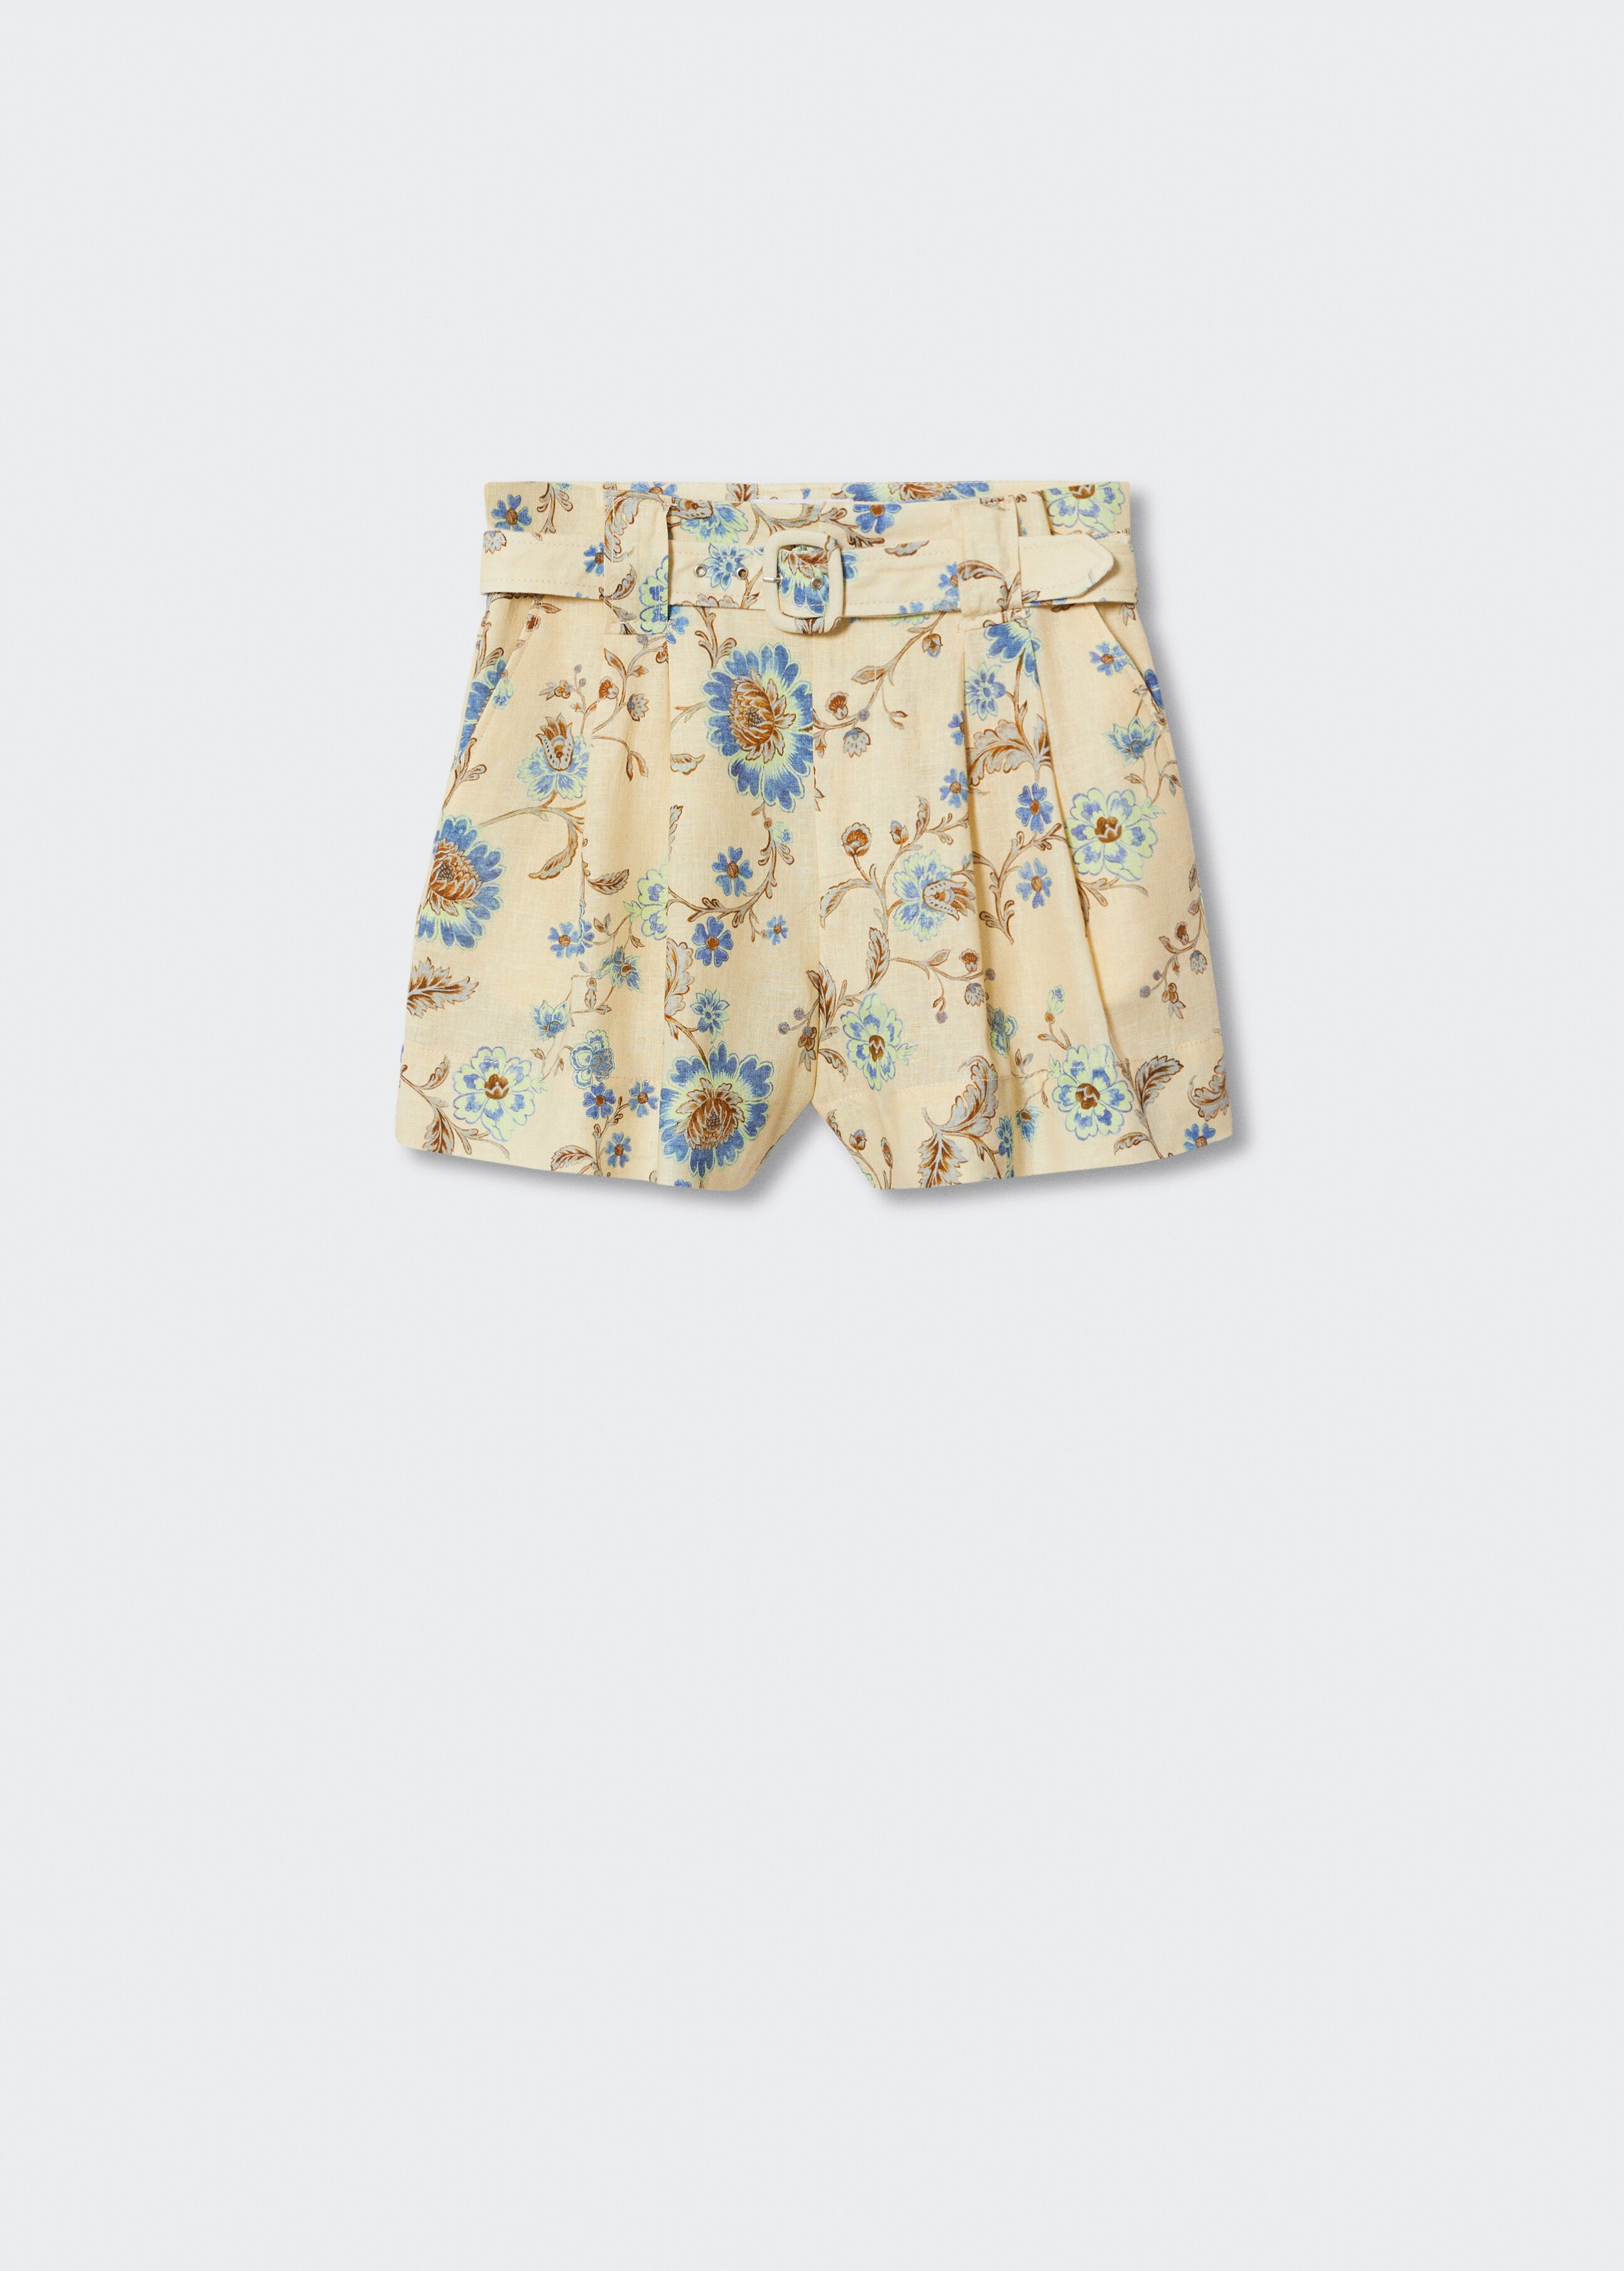 Linen printed shorts - Article without model